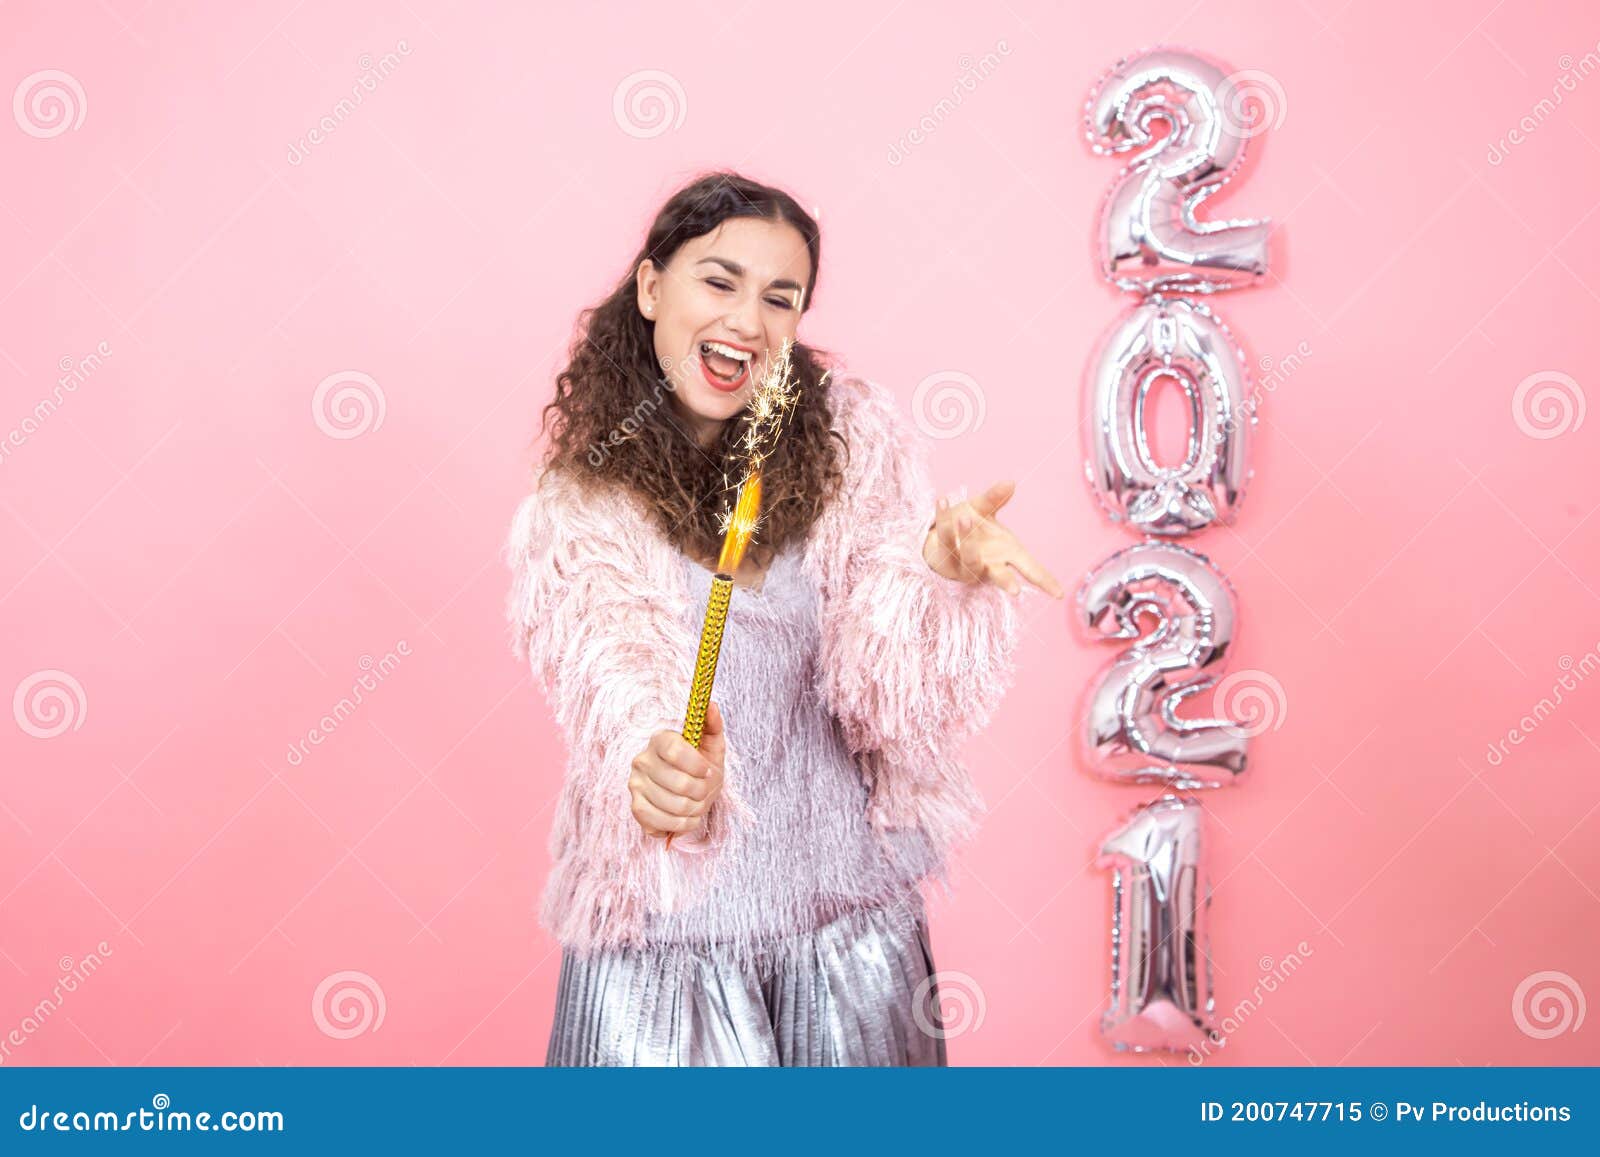 young woman on a pink background with silver ballons in the form of the numbers 2021